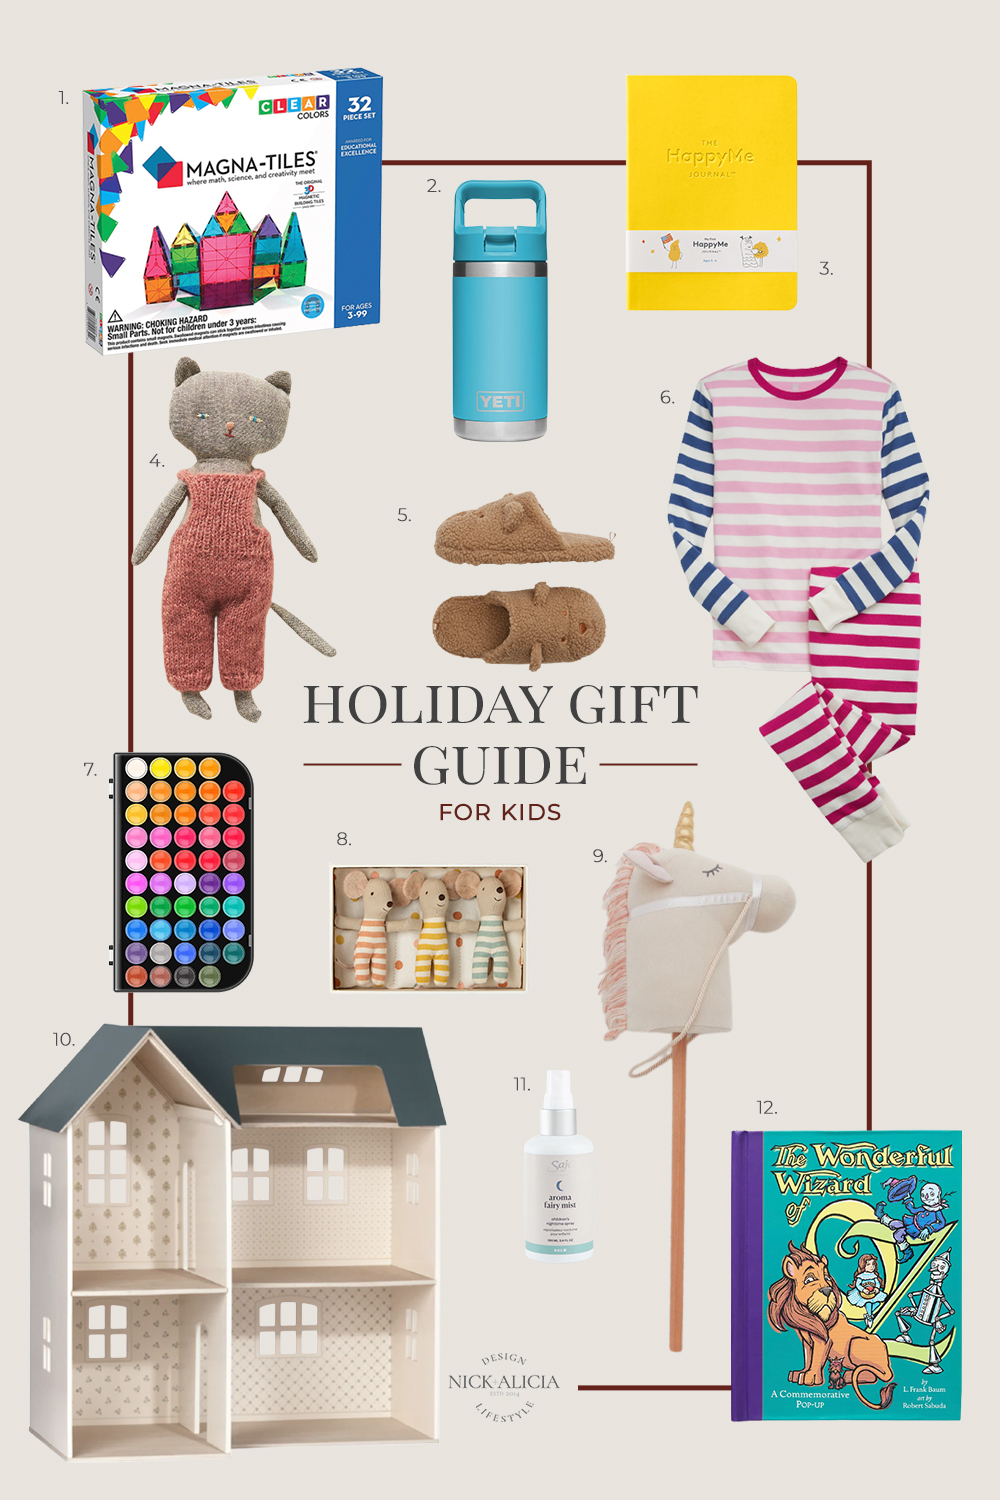 Gift Guide for Kids - The Latest in Kid-Friendly Gifts for the Holidays -  Nick + Alicia